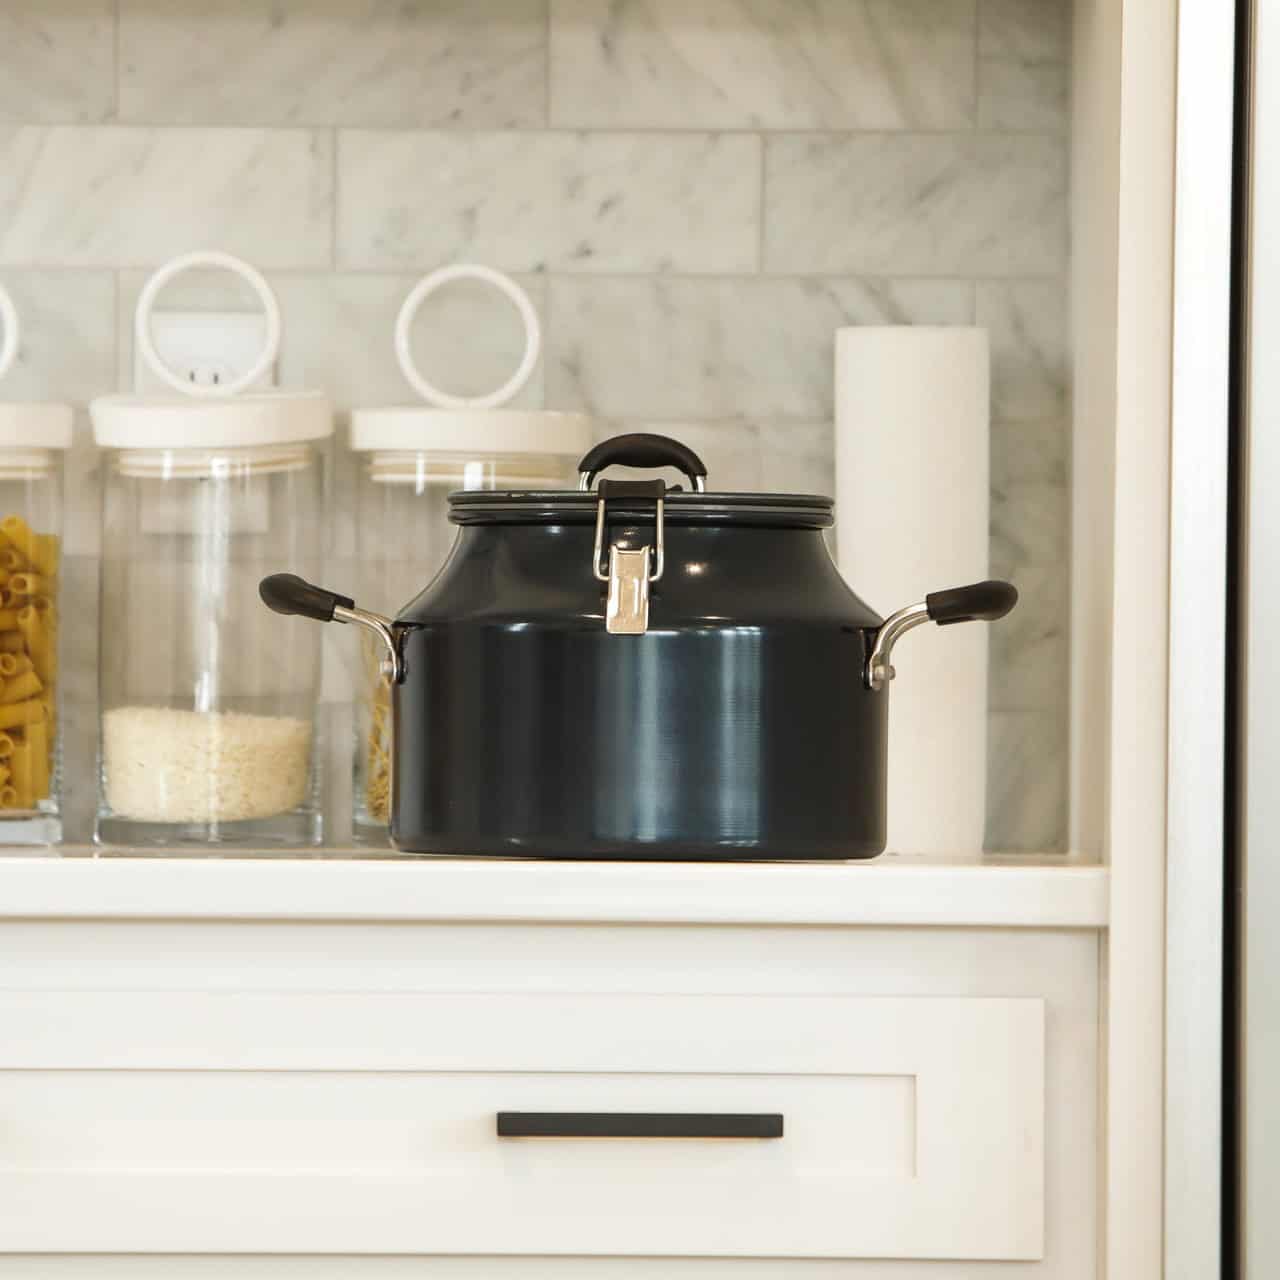 https://www.cancooker.com/wp-content/uploads/2020/10/products-Signature_Series_Resize_7__83667.1603144614.1280.1280.jpg